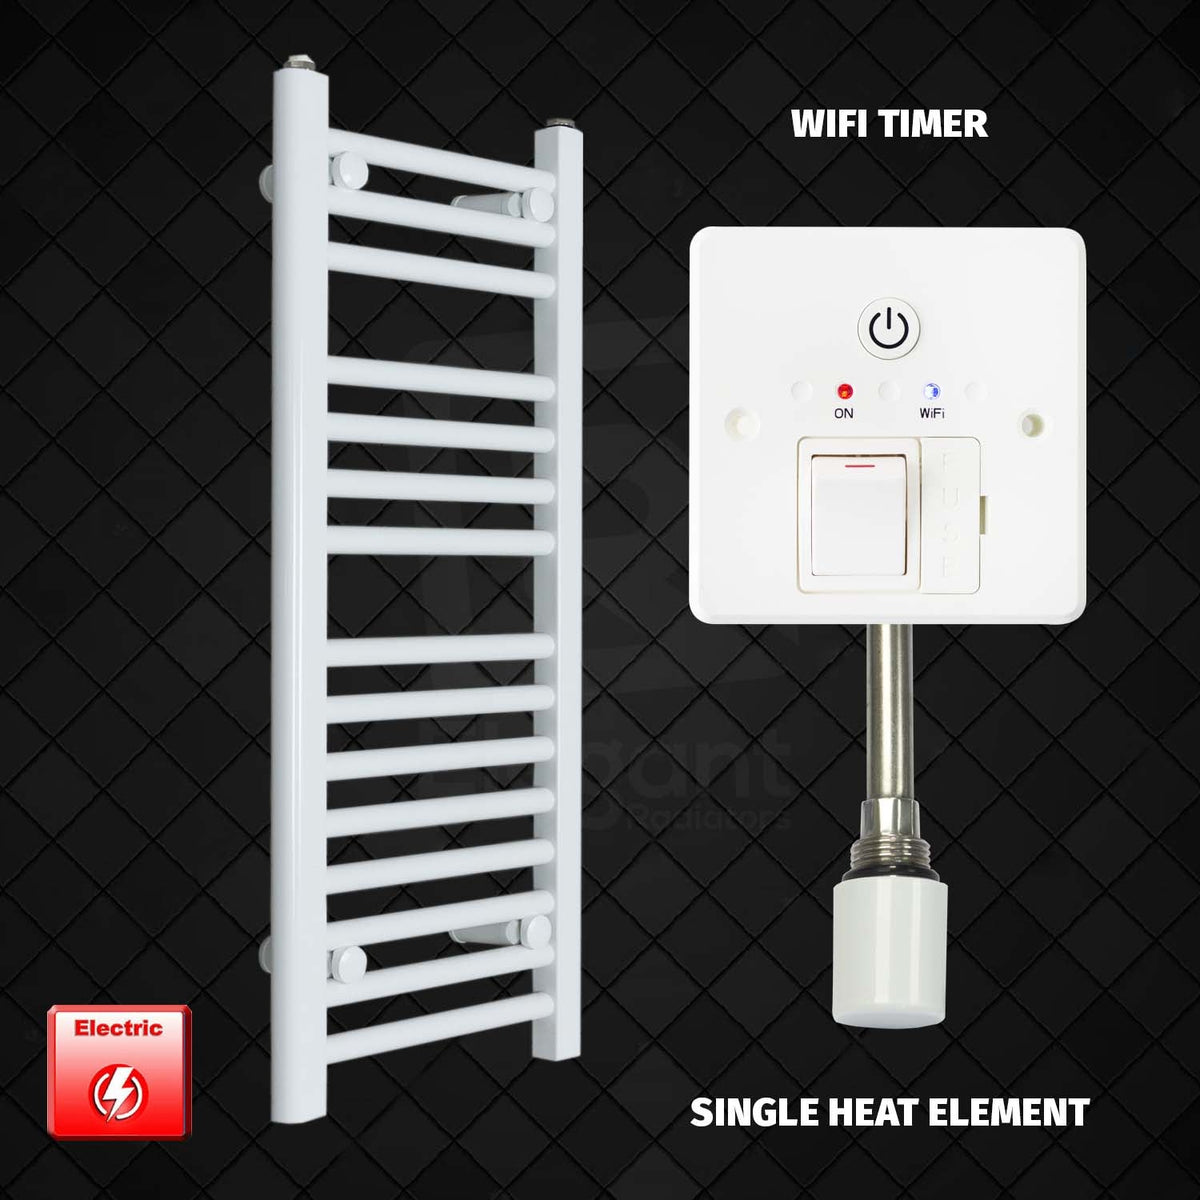 800 x 400 Pre-Filled Electric Heated Towel Radiator White Wifi Timer